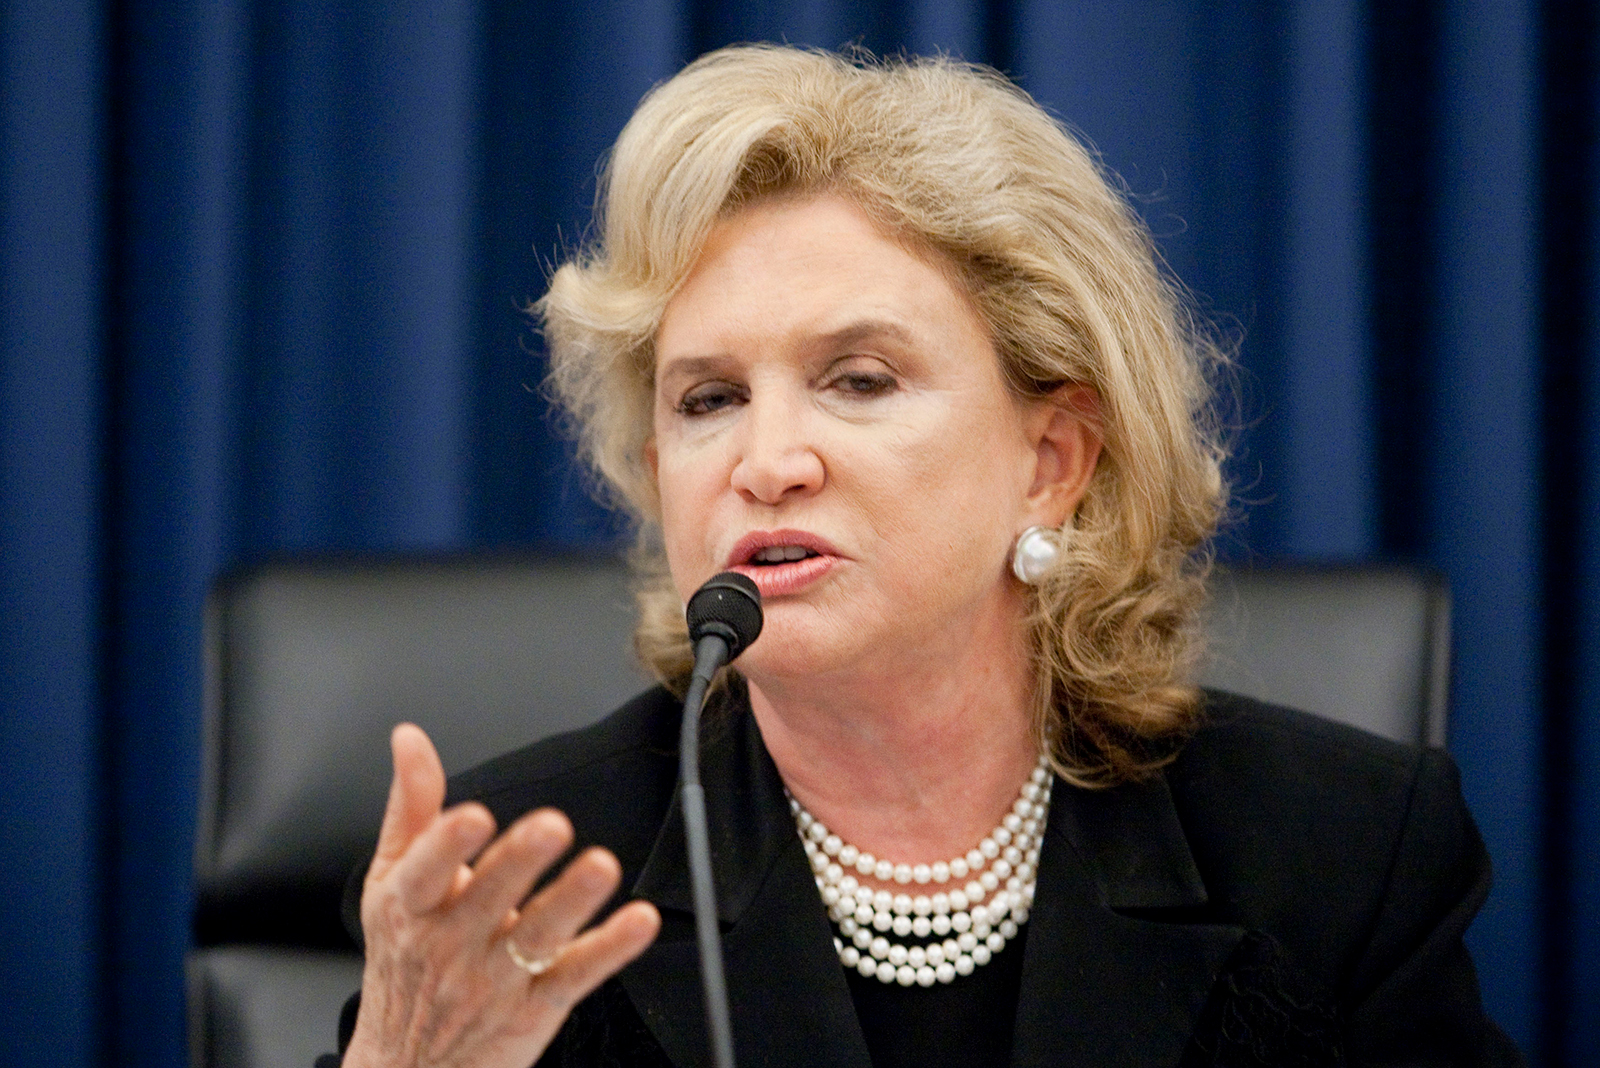 New York Representative Carolyn Maloney speaks at a joint Economic Committee hearing in Washington, DC on November 19, 2009. 